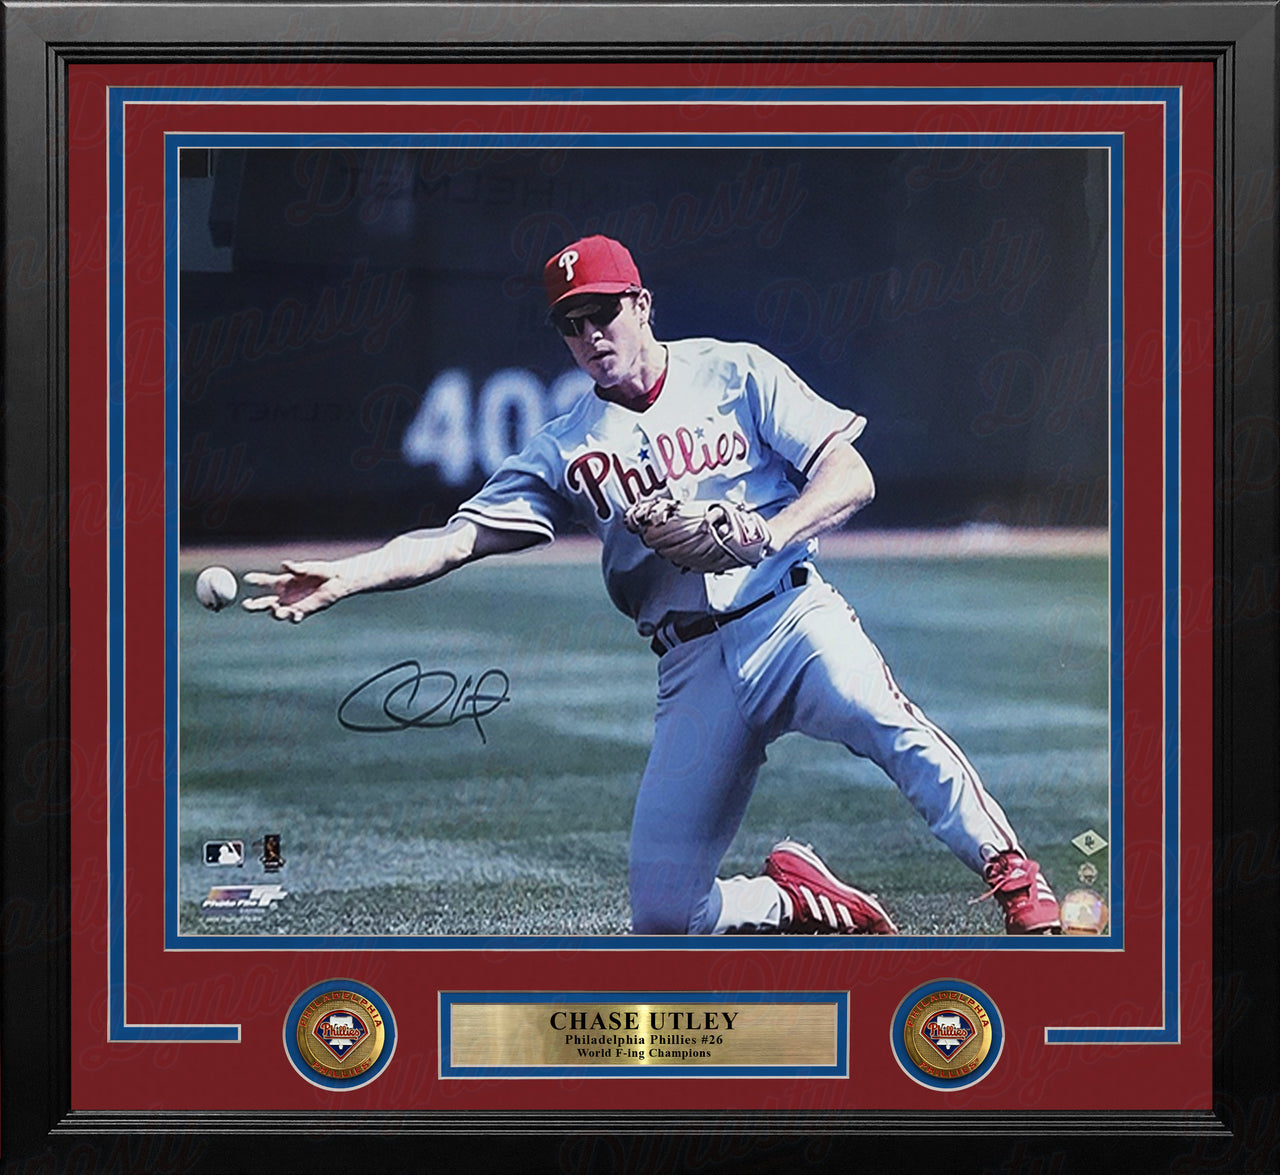 Chase Utley Throwing Action Philadelphia Phillies Autographed 16" x 20" Framed Baseball Photo - Dynasty Sports & Framing 